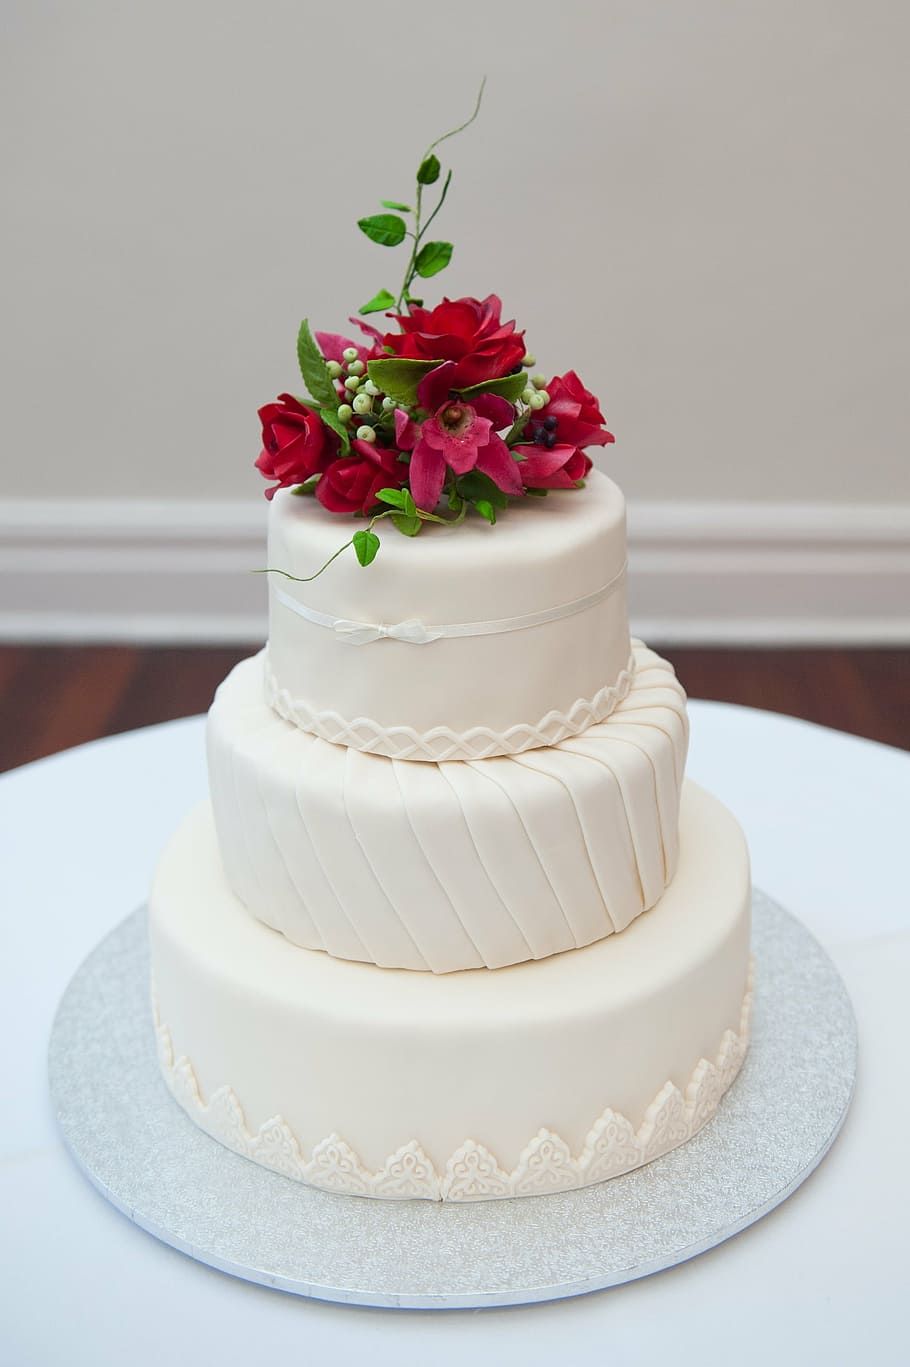 3-tier cake with pink petaled flowers on top, wedding cake, sweet